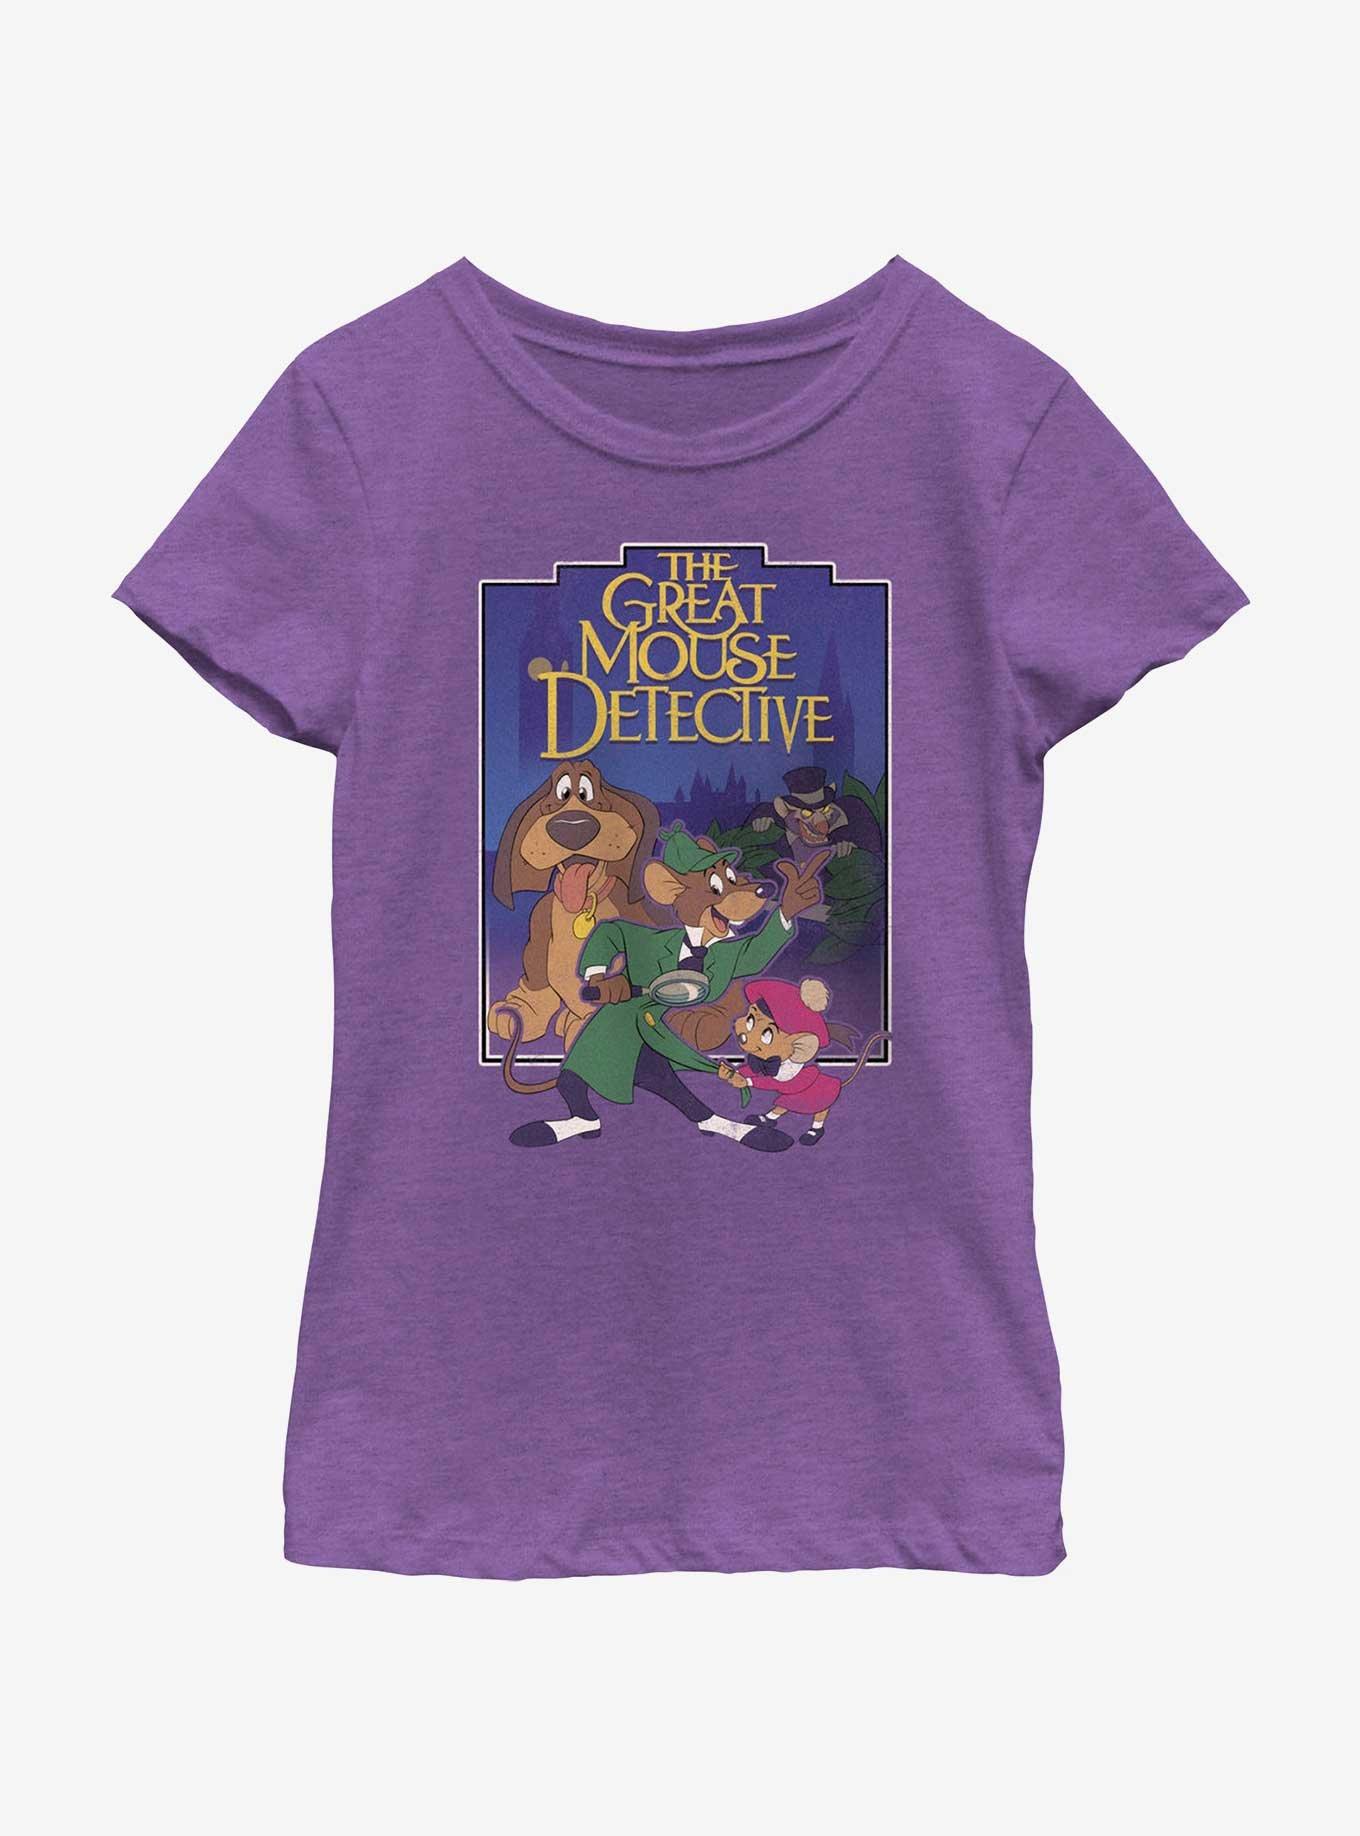 Disney The Great Mouse Detective Poster Youth Girls T-Shirt, PURPLE BERRY, hi-res